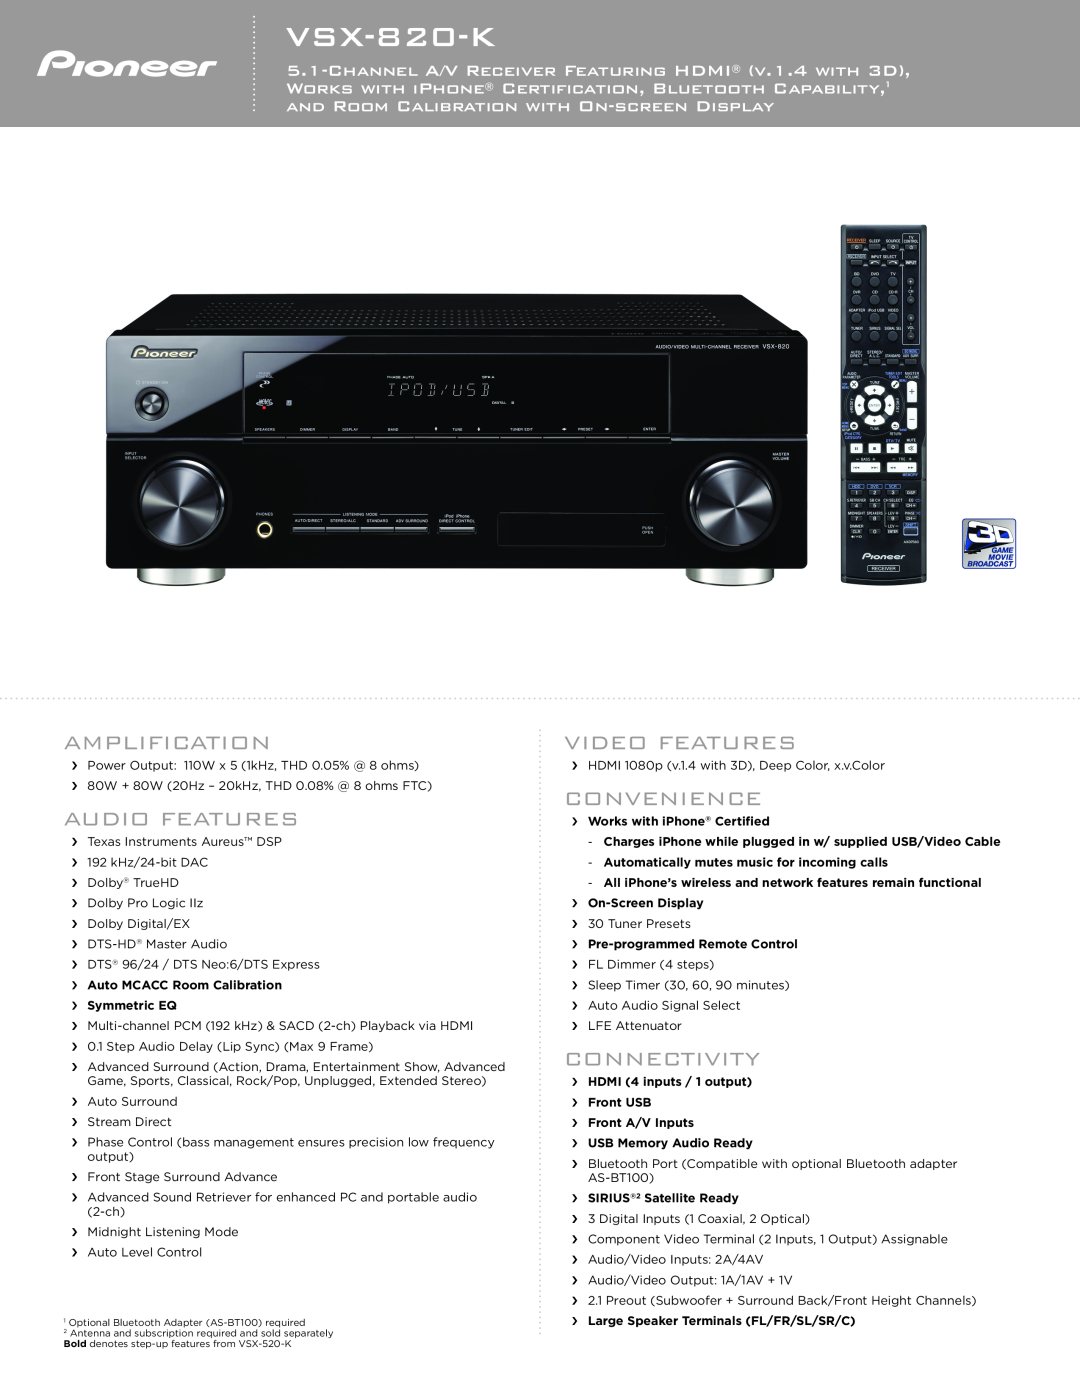 Pioneer VSX-820-K manual Amplification, Audio Features, Video Features, Convenience, Connectivity 